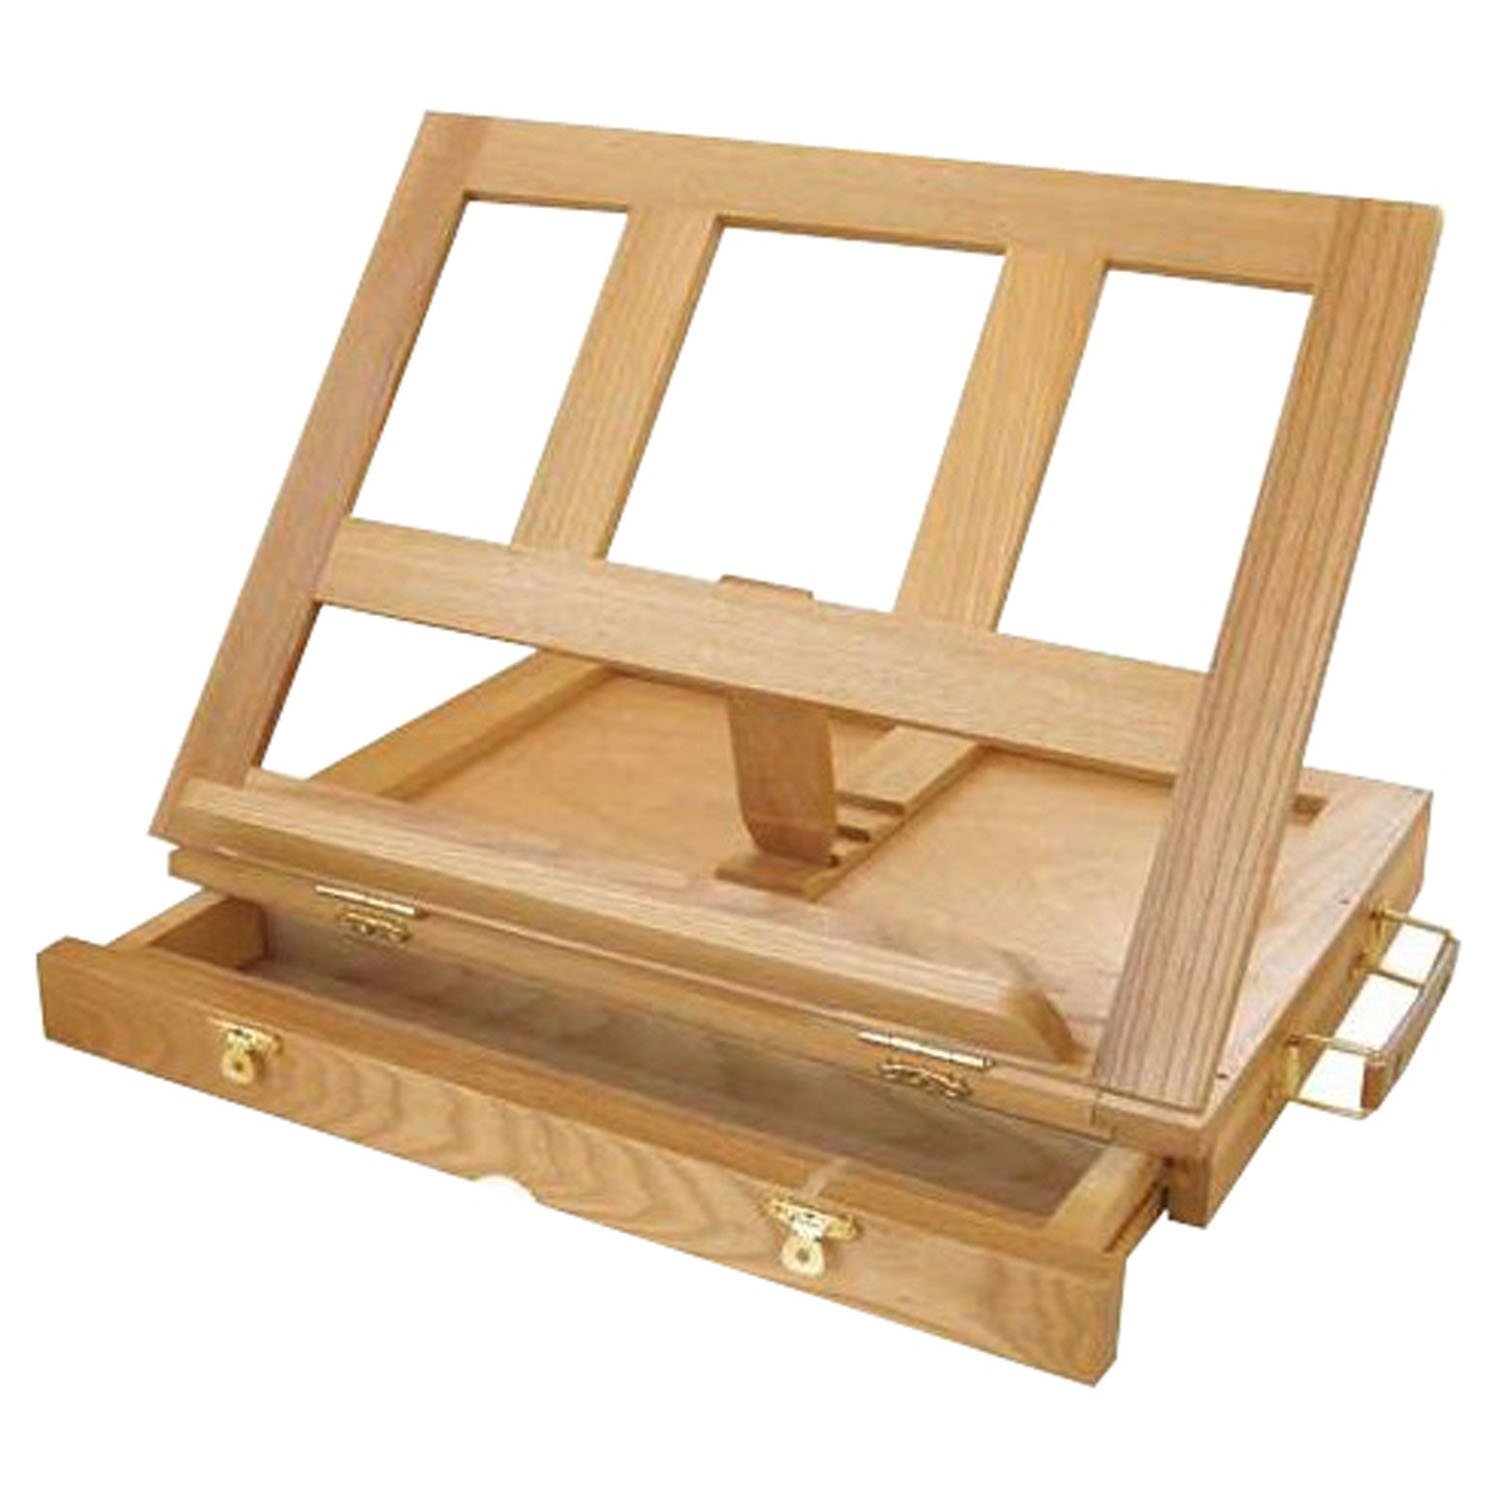 A Portable Artist Easel That Goes Anywhere!Western Trails Fine Art  Collection